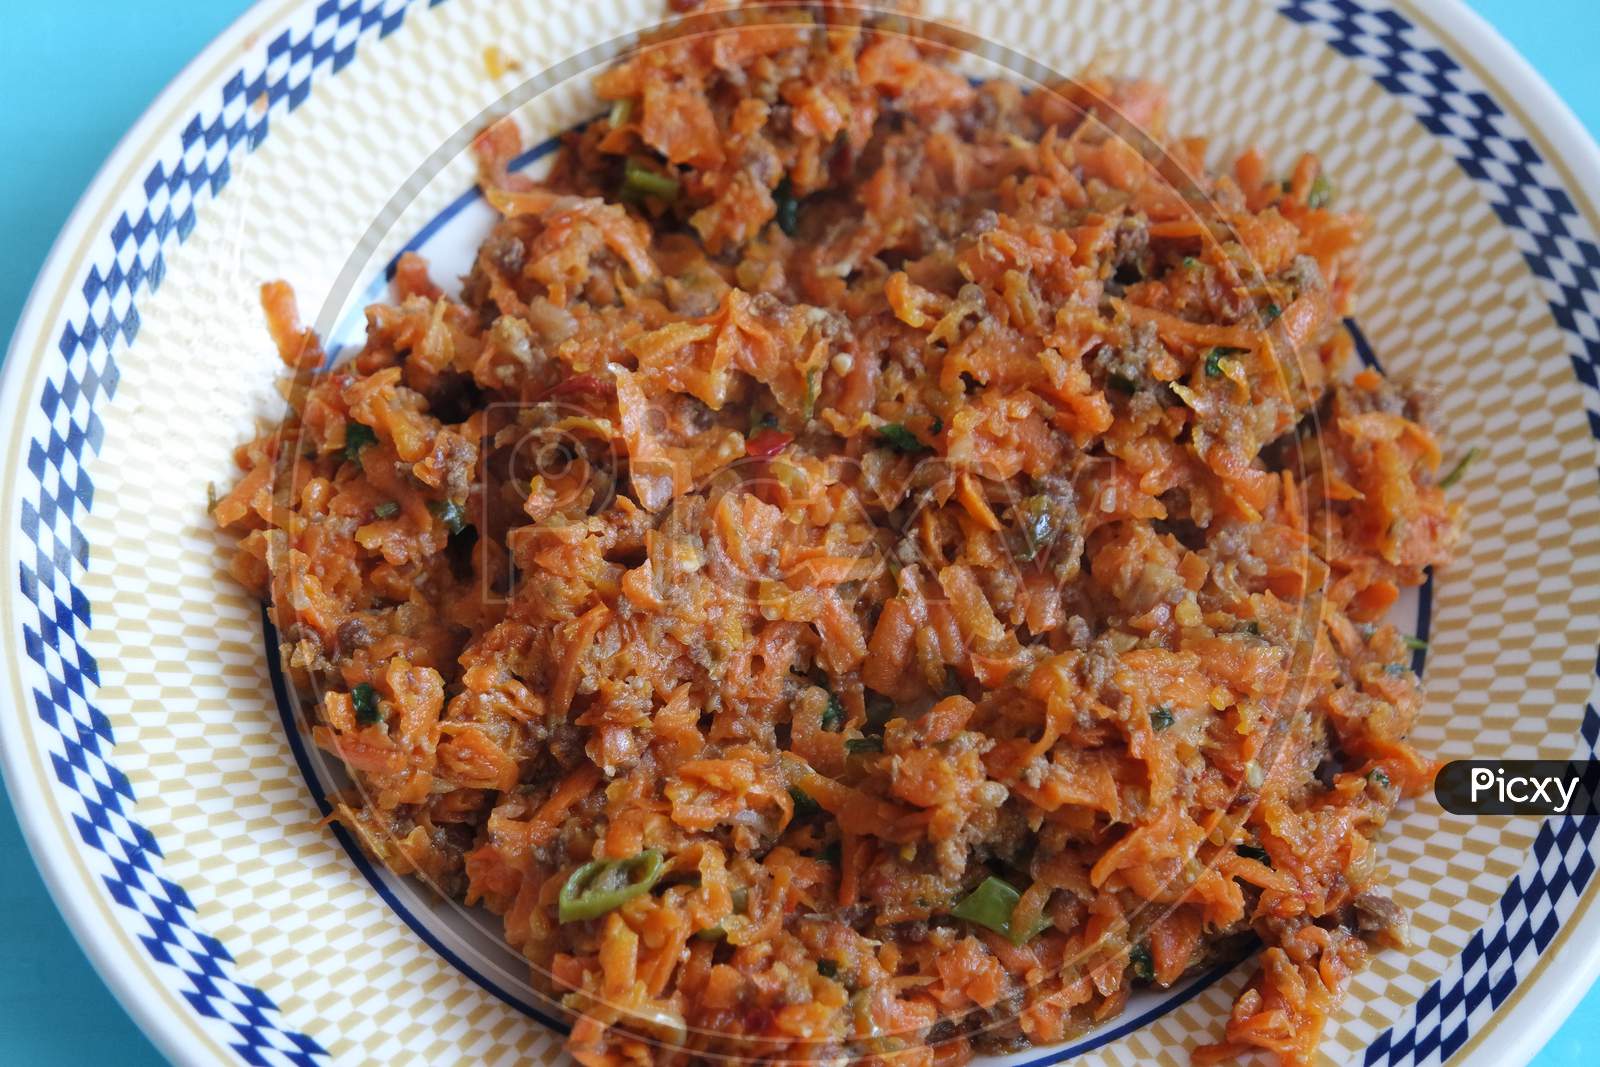 Top Closeup View Of A Homemade Dish Made From Carrot And Vegetables.